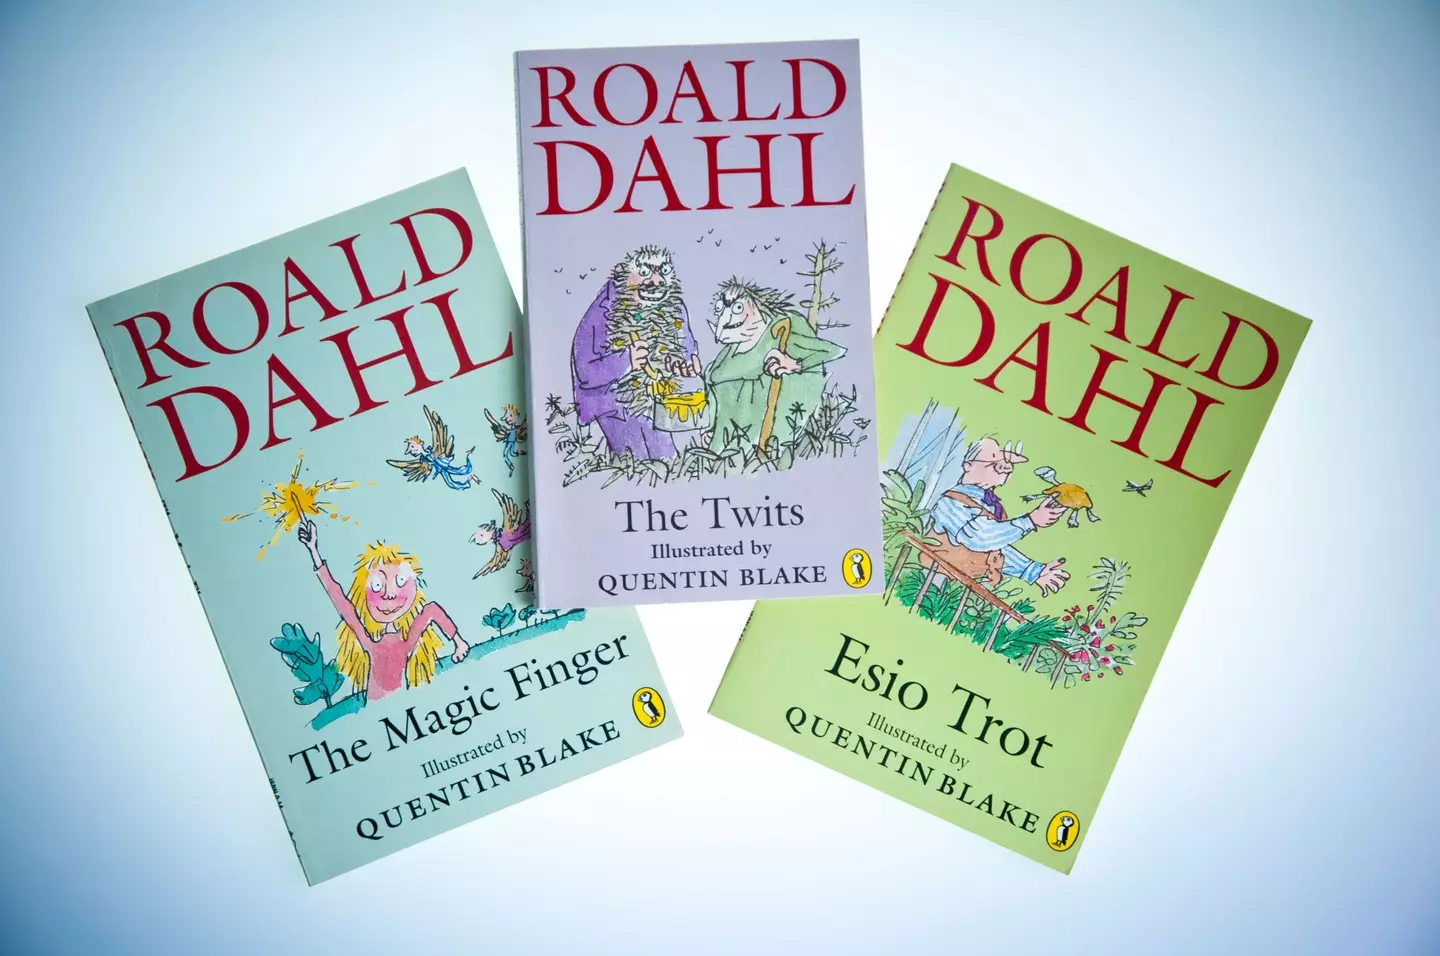 Publisher Puffin recently came under fire for editing works by Roald Dahl.